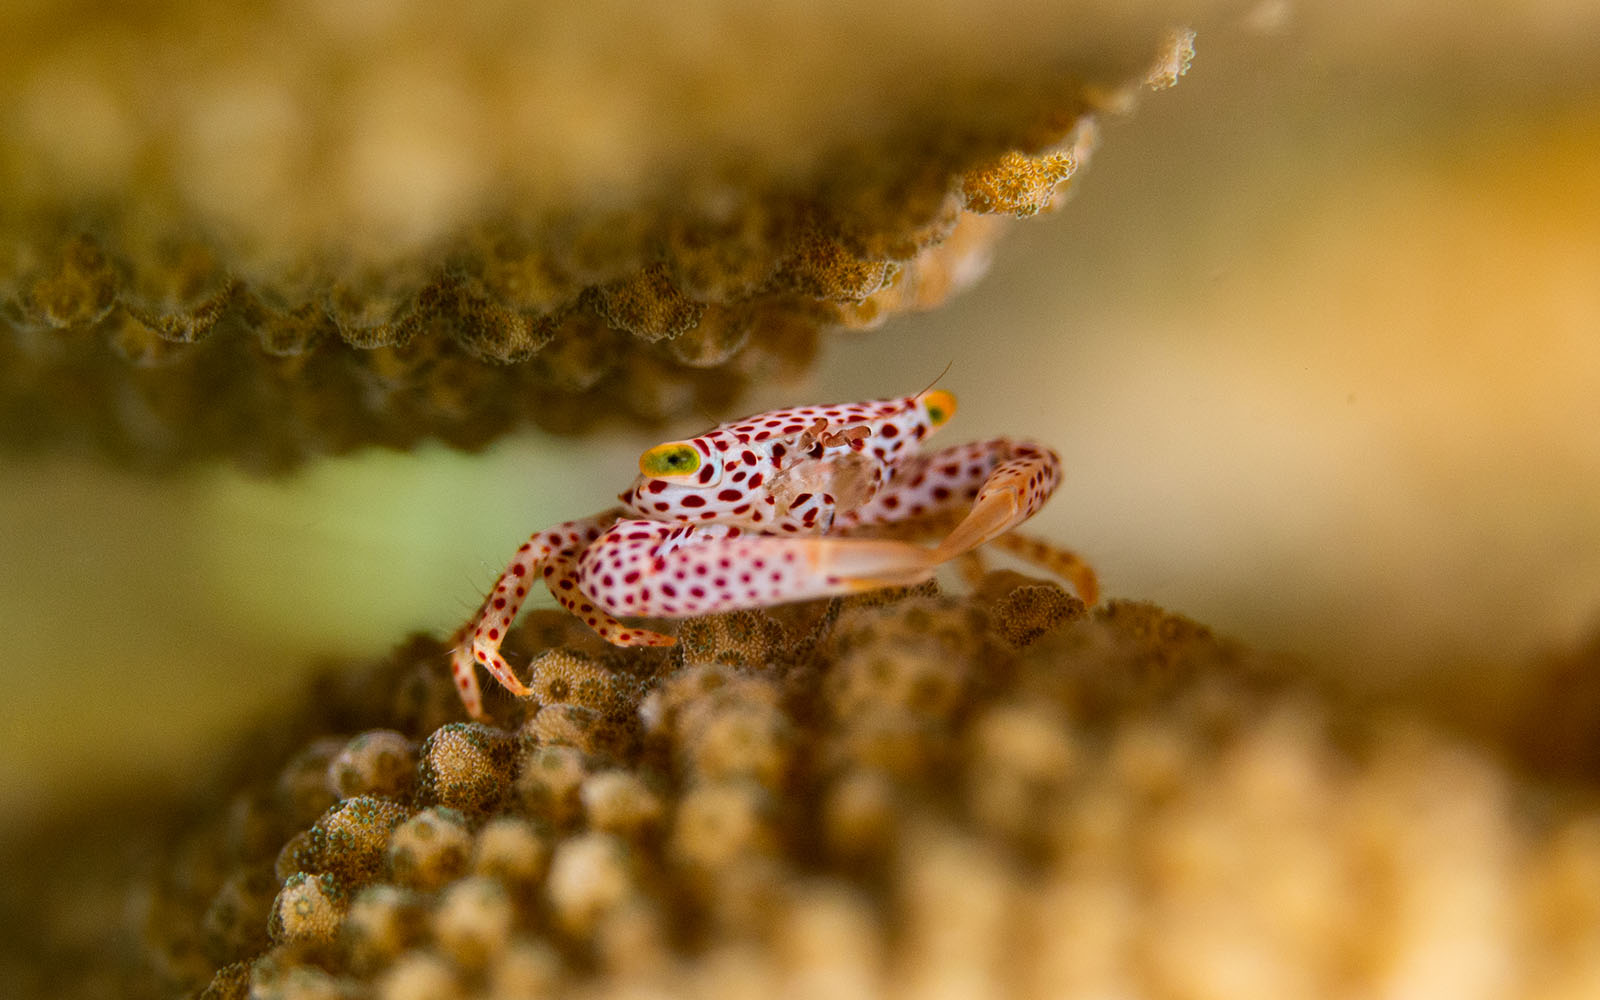 Trapezia crab photographed by Snorkel Vacations on a snorkeling trip to Raja Ampat